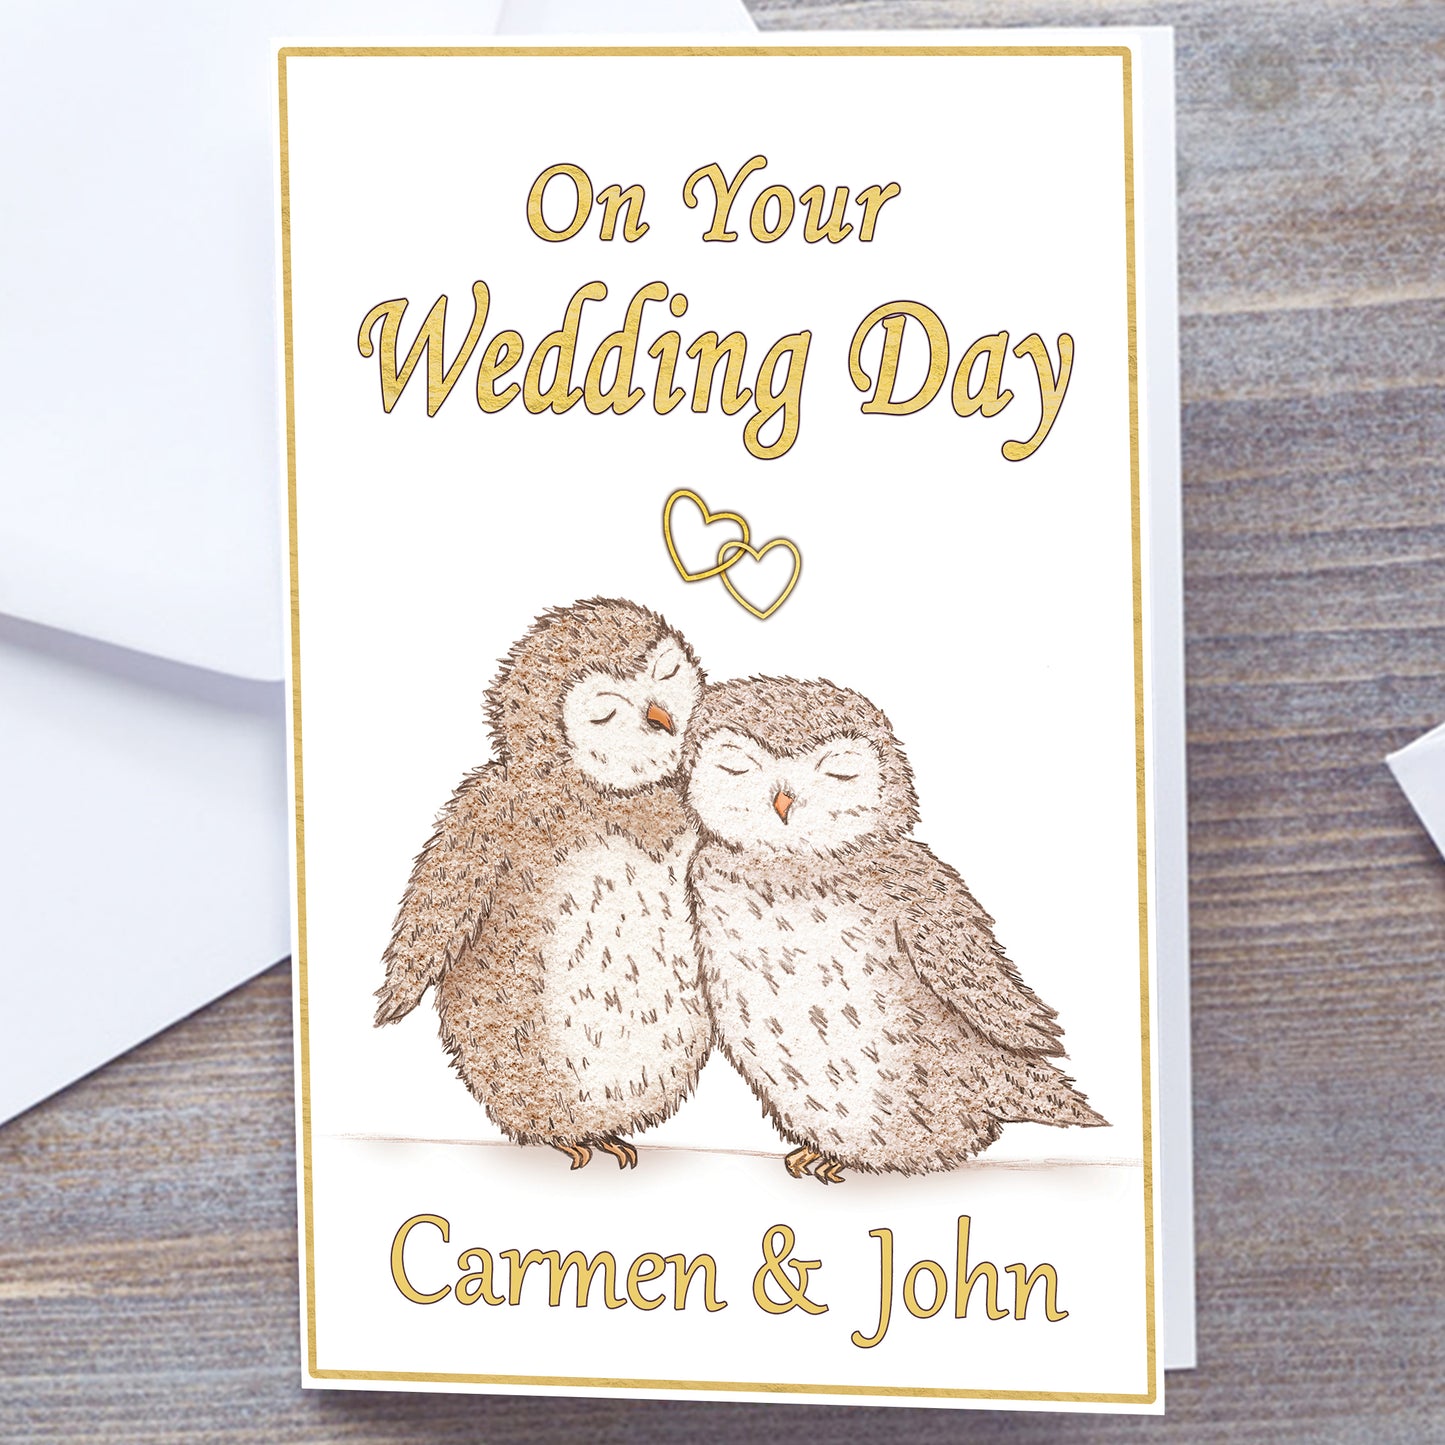 Personalised "On Your Wedding Day" - A5 Snuggling Owls Card